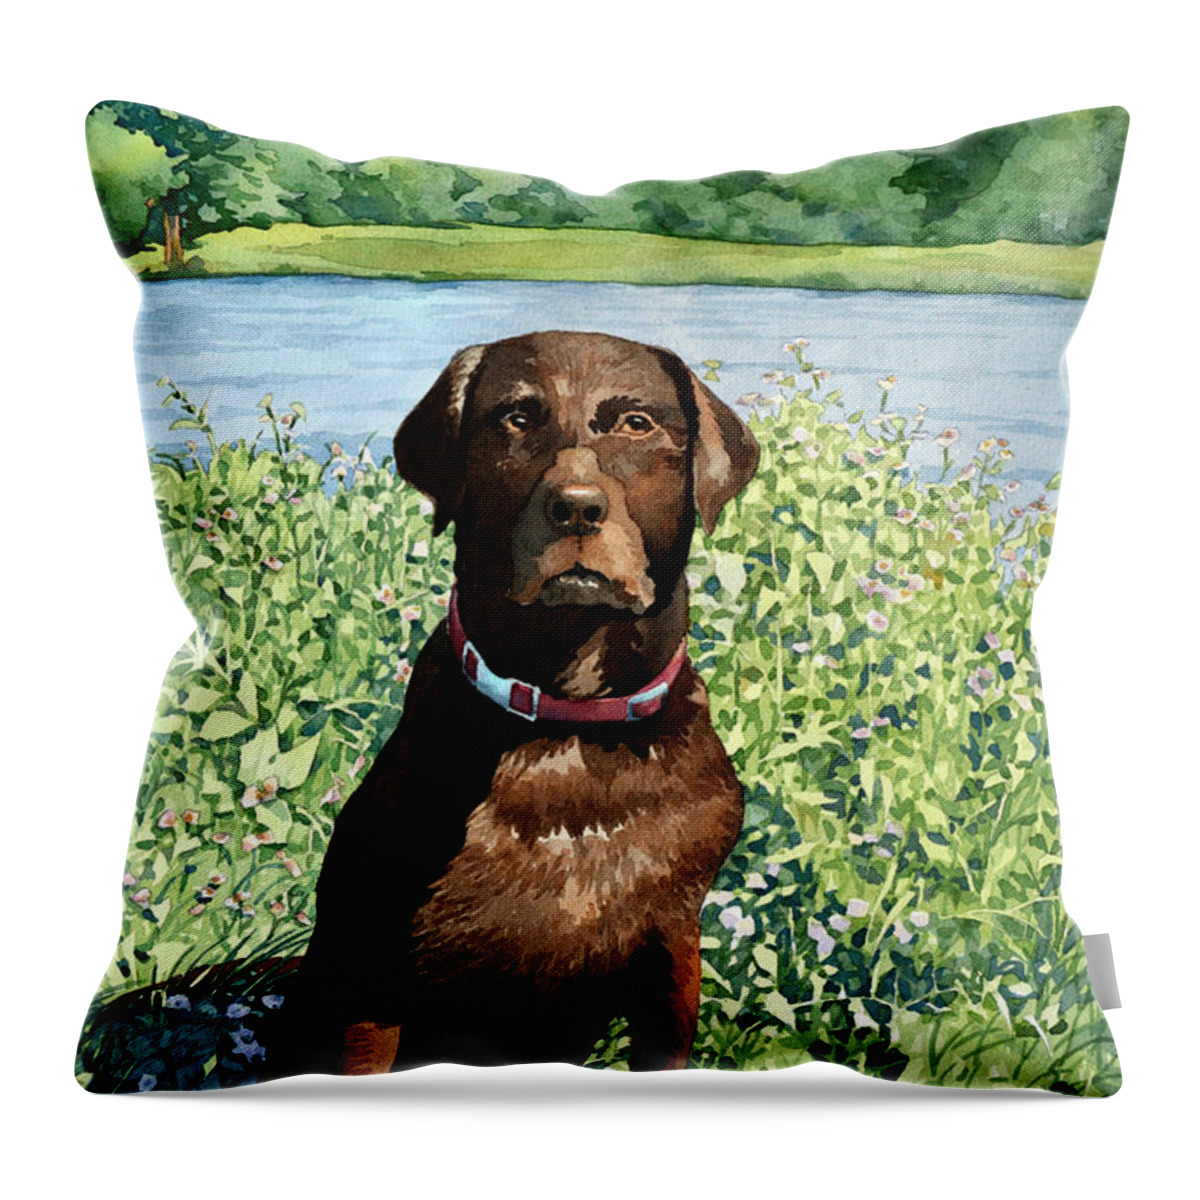 #portrait #dog #watercolor #painting #water #stateparks #hunting Throw Pillow featuring the painting Dog Portrait #1 by Mick Williams